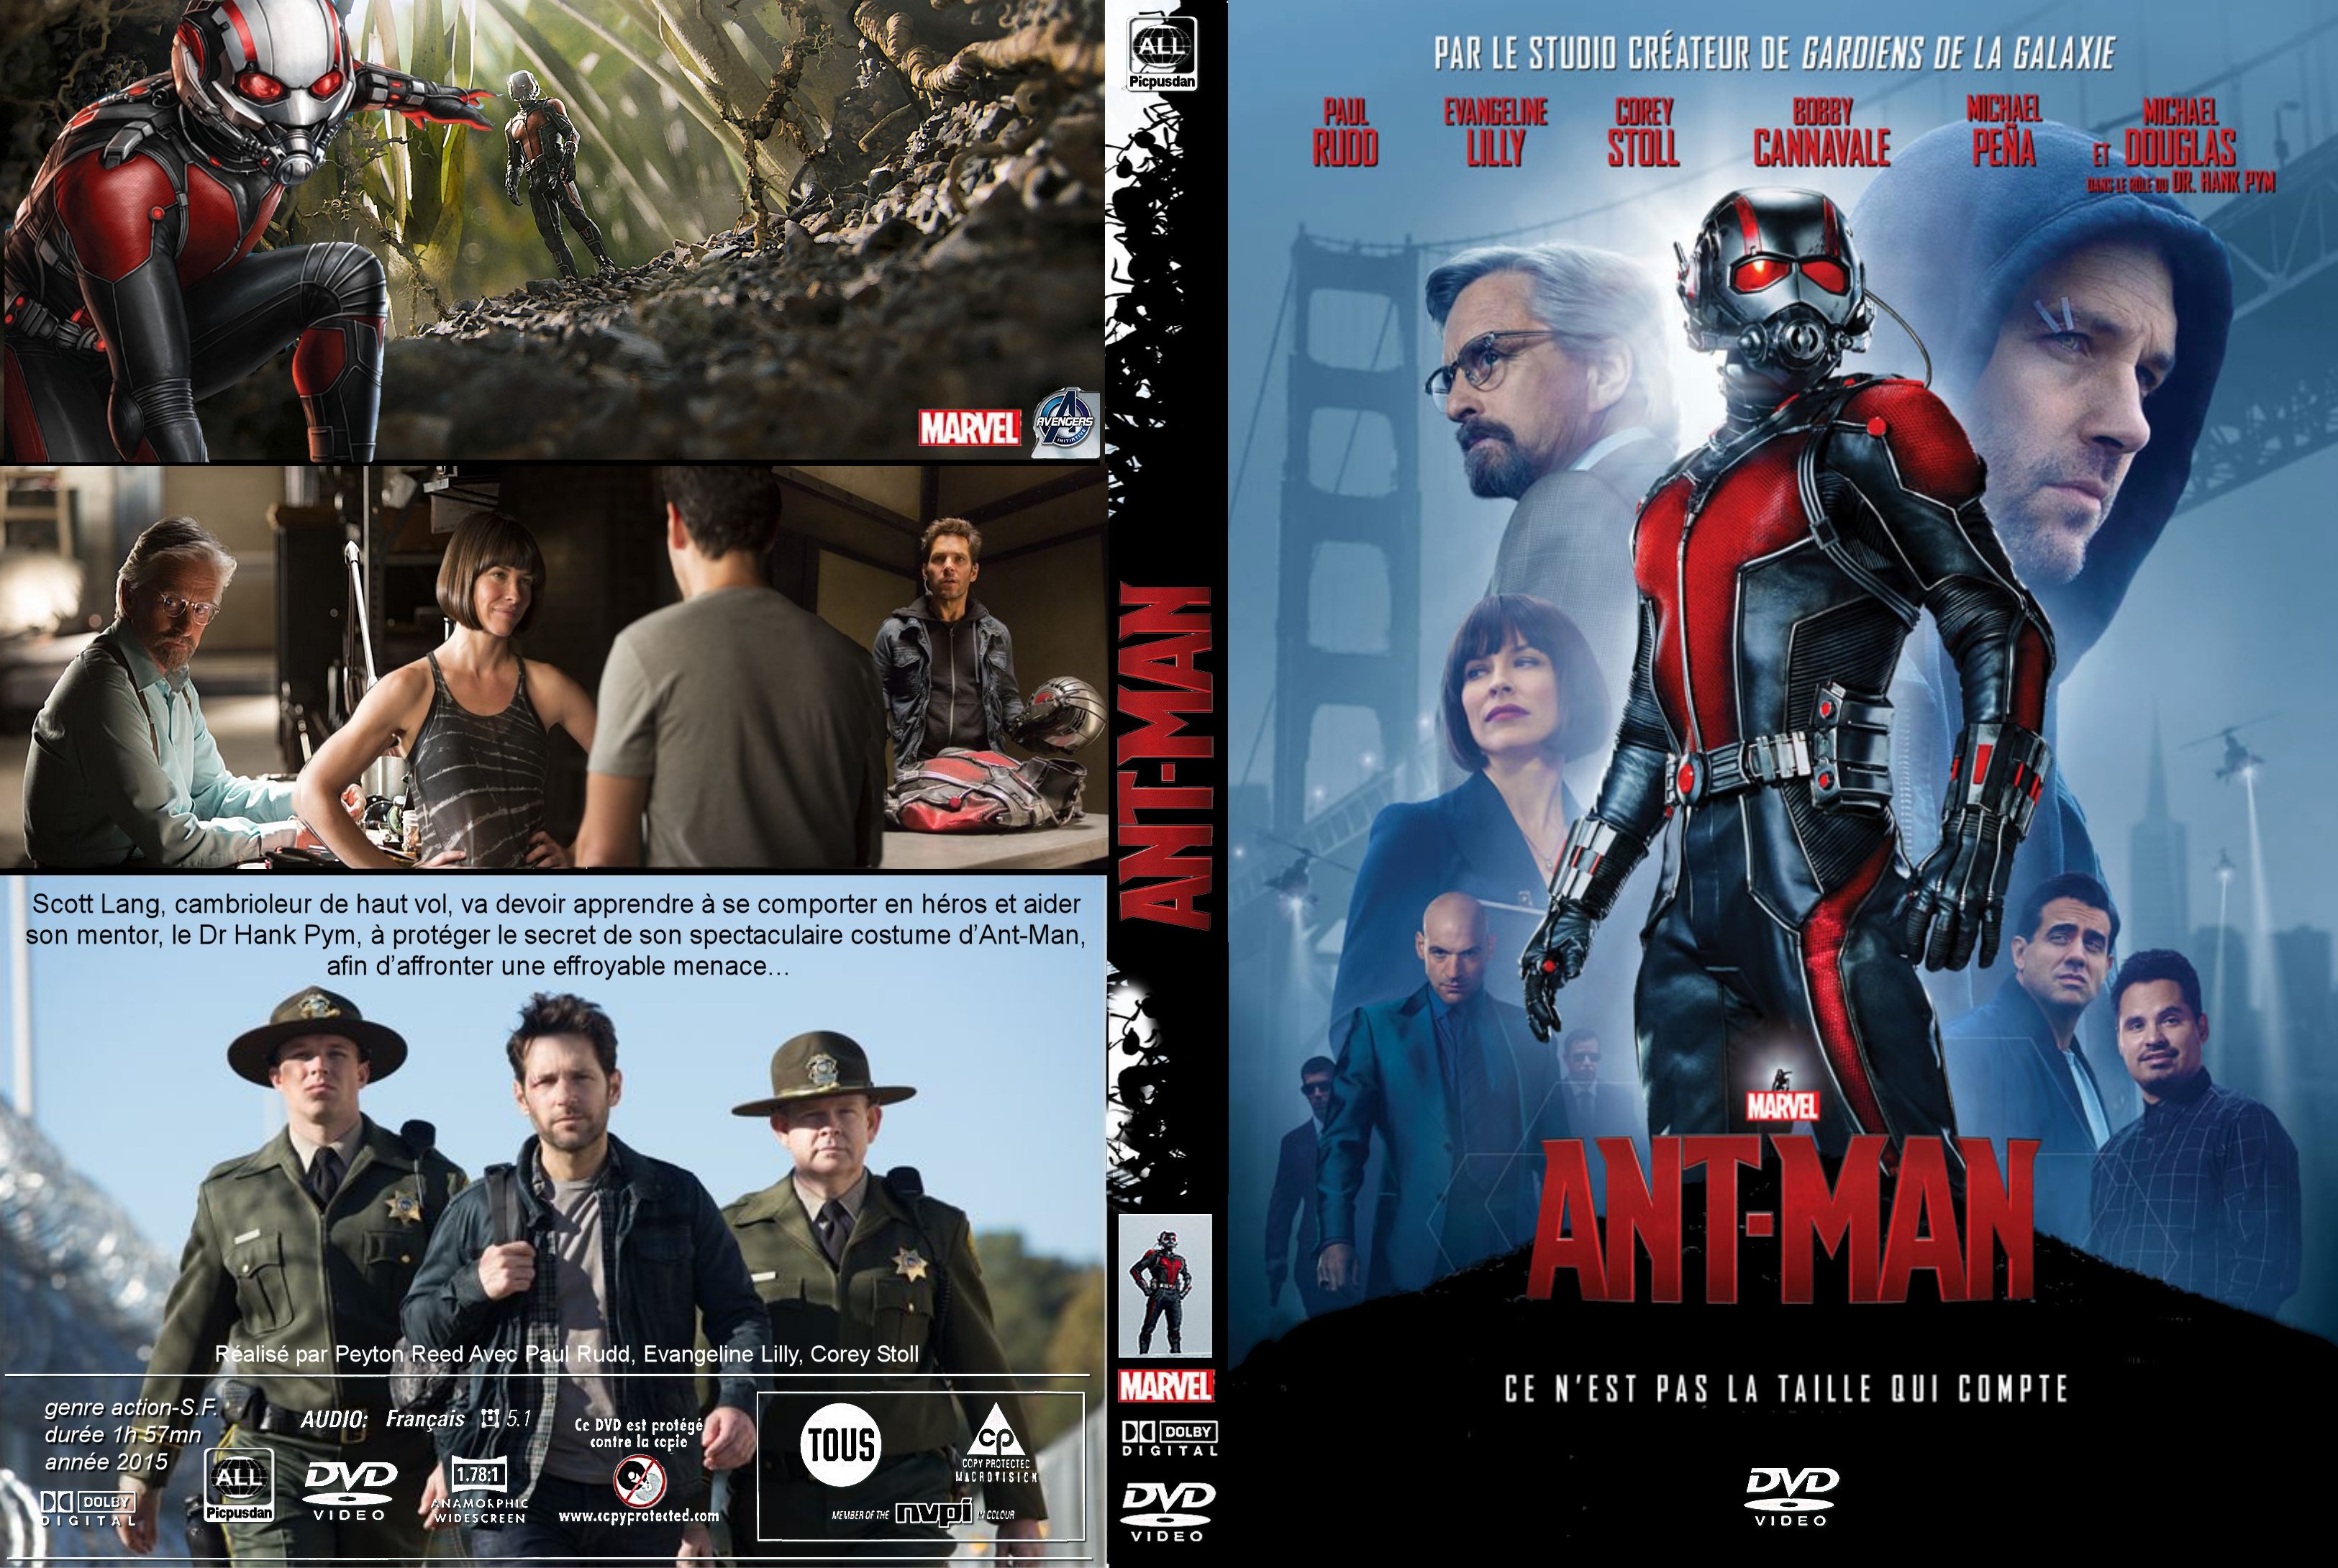 Jaquette DVD Ant-man (canadienne)